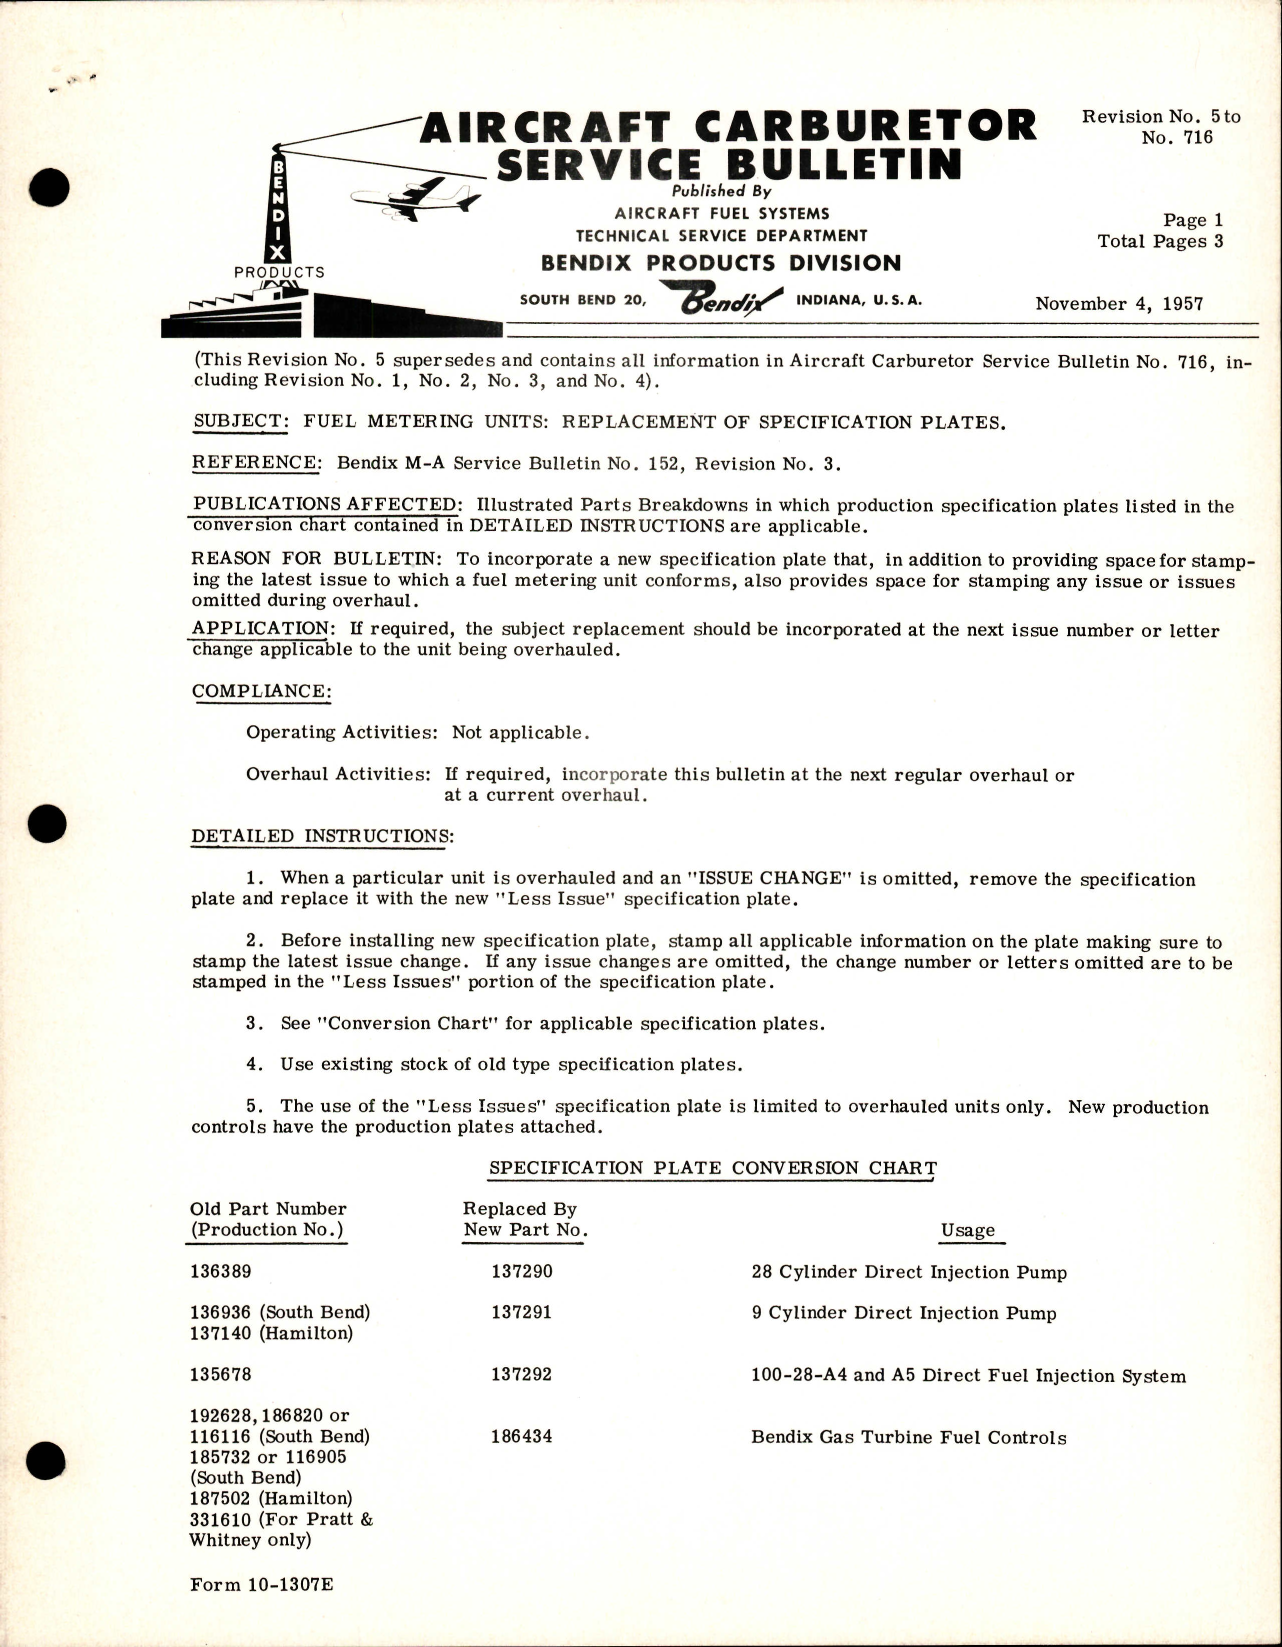 Sample page 1 from AirCorps Library document: Fuel Metering Units, Replacement of Inspection Plates